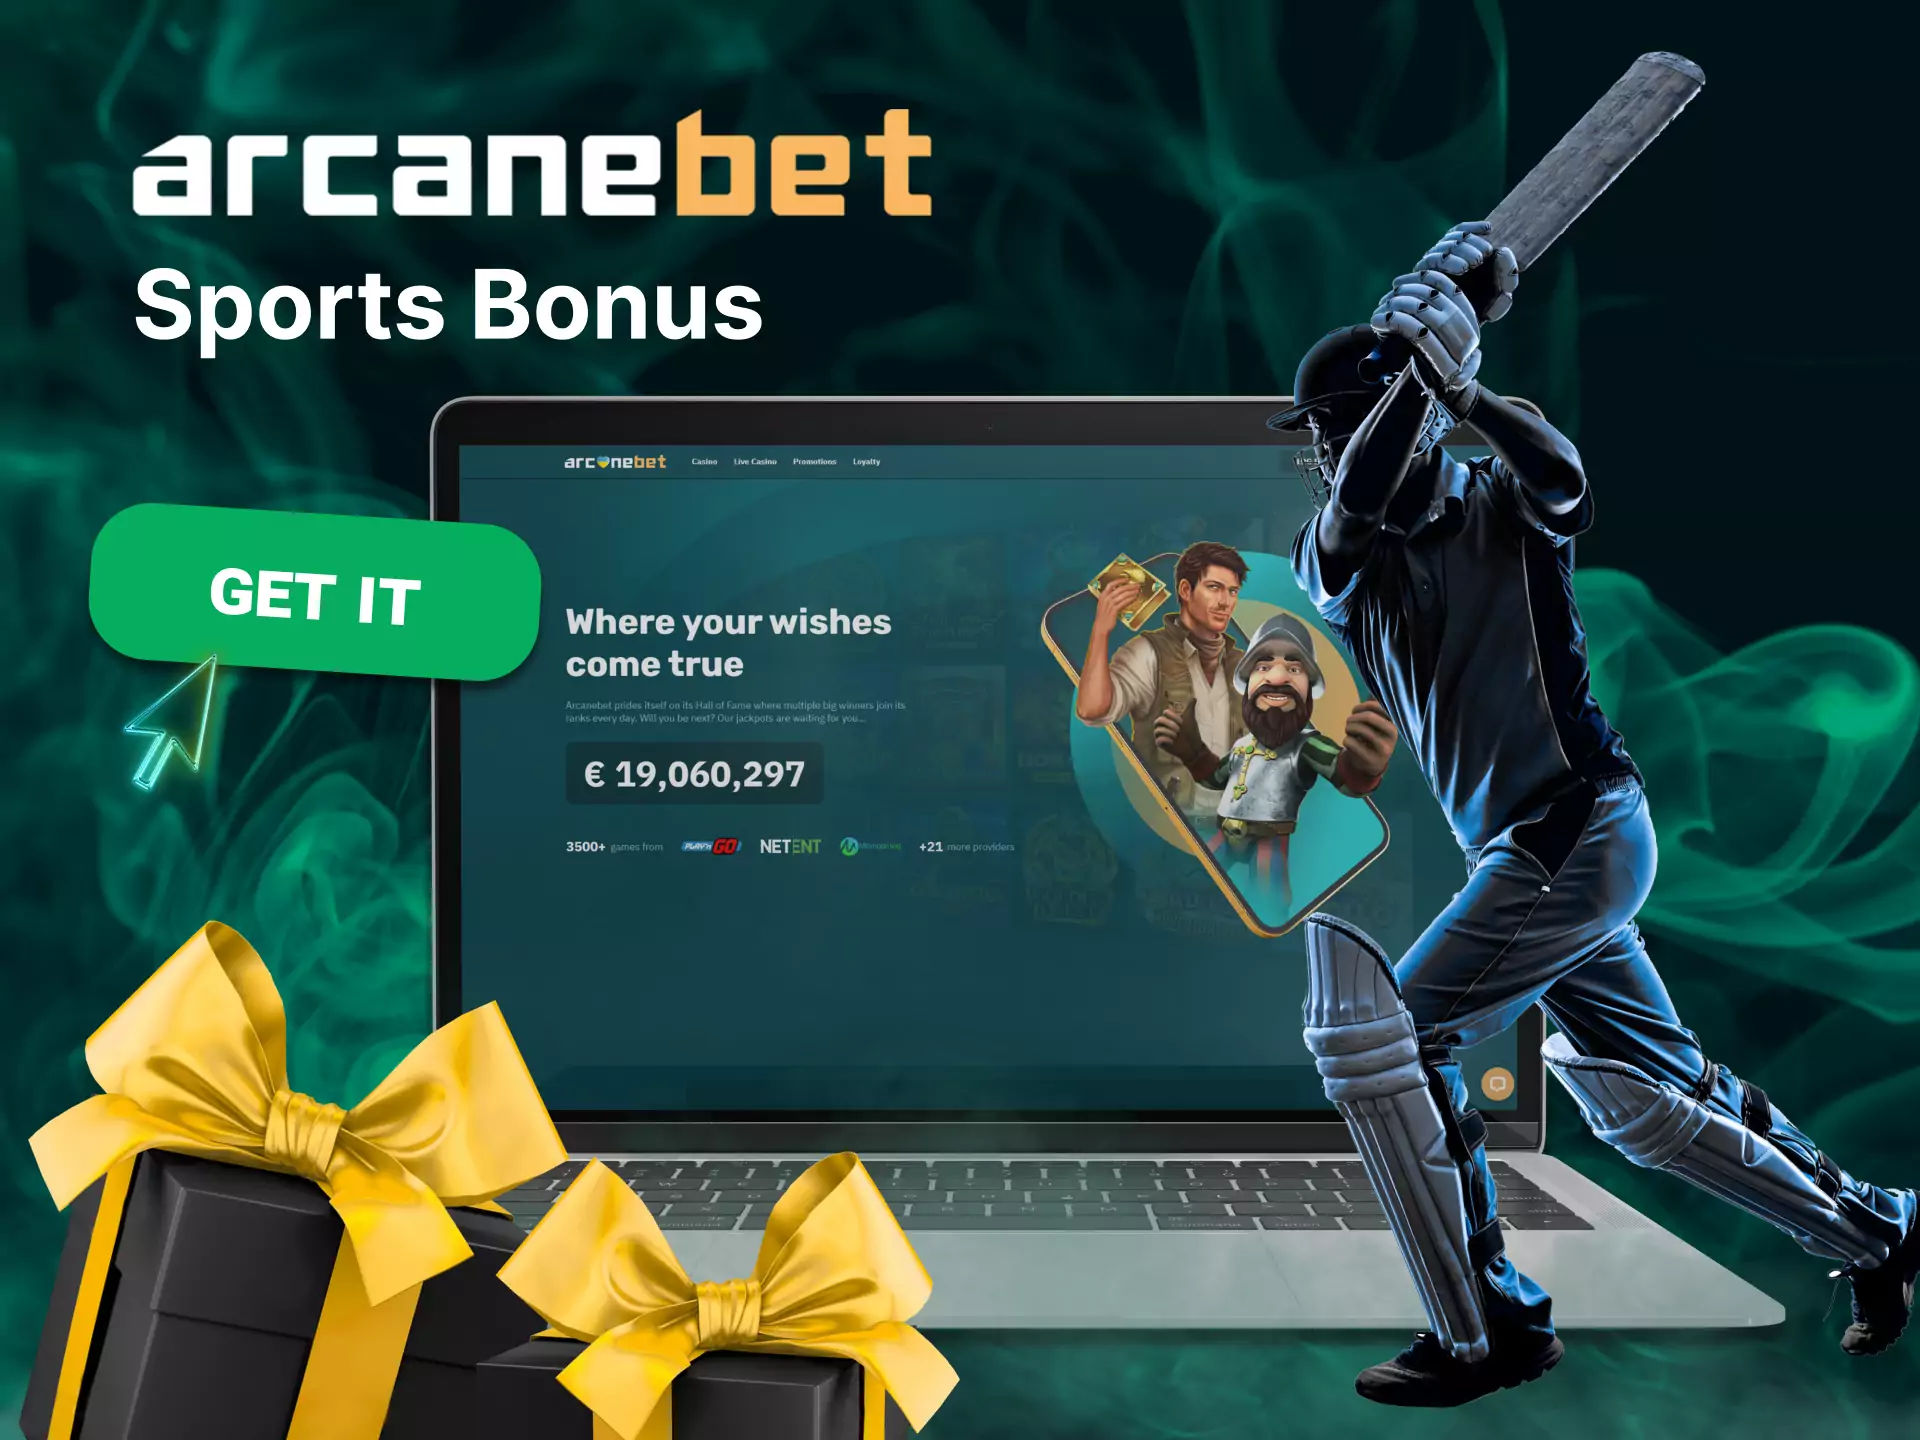 Try a special bonus for sports in Arcanebet.